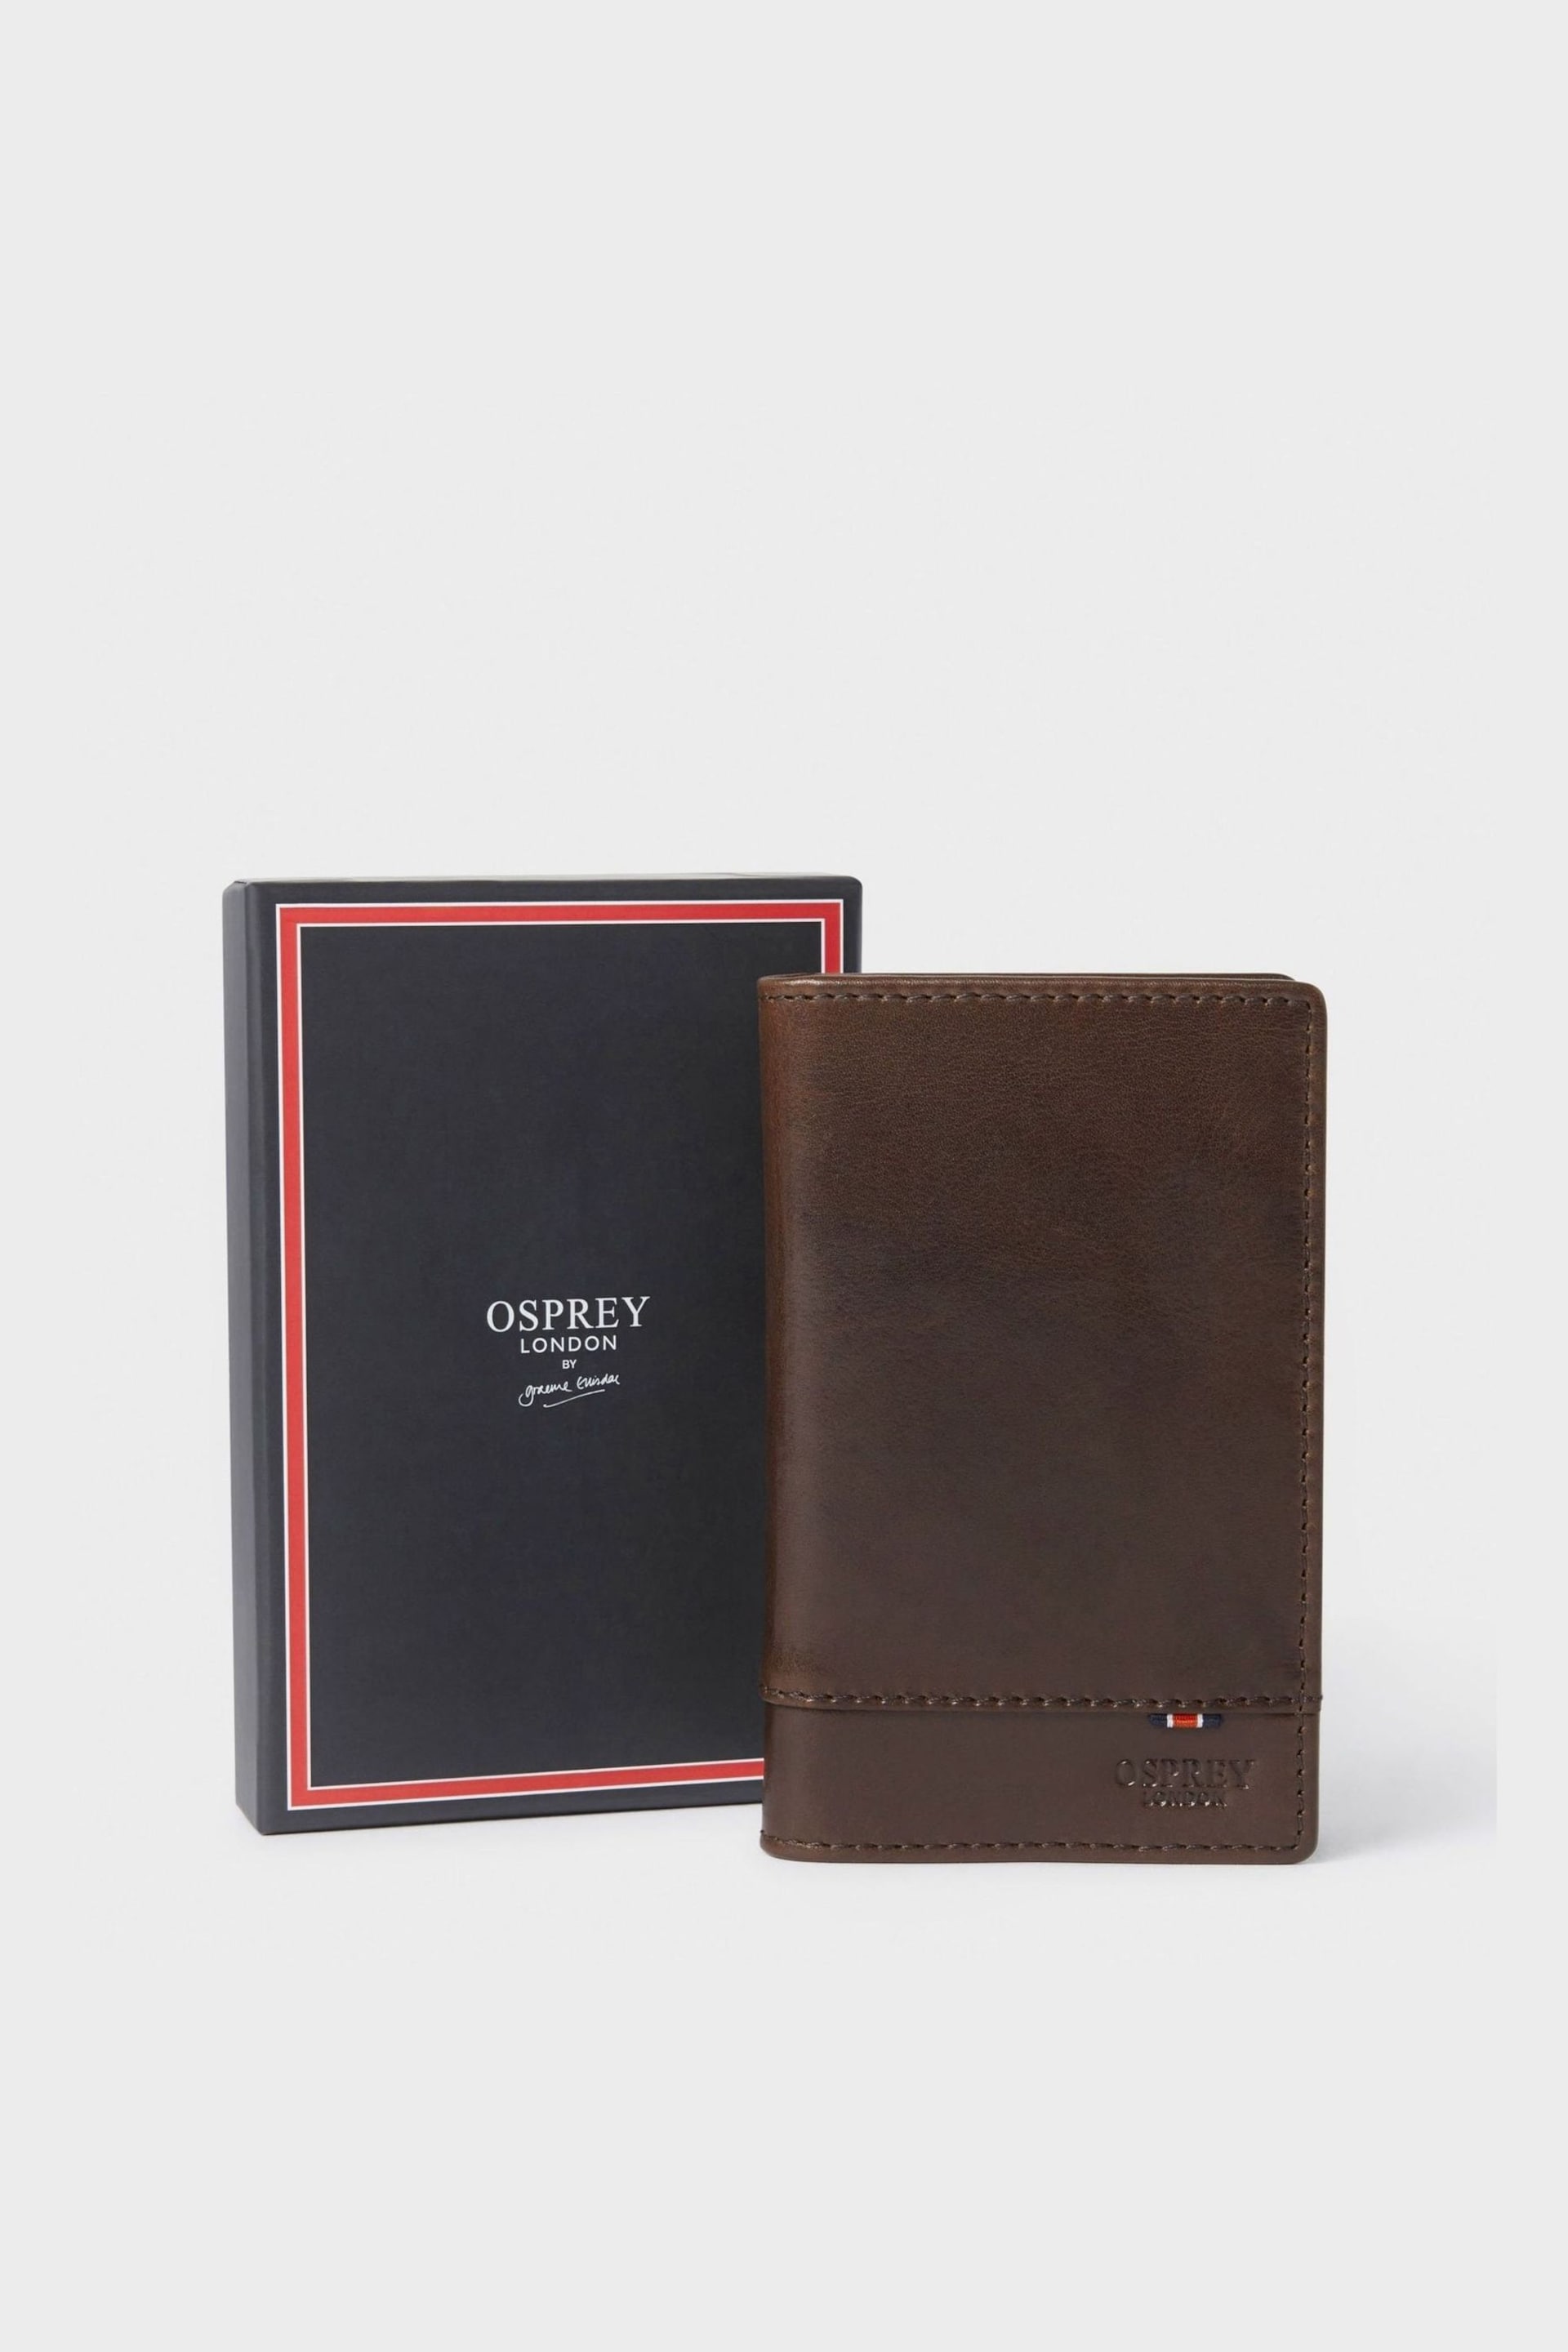 Osprey London Leather Micro Leather Dress Wallet - Image 1 of 5